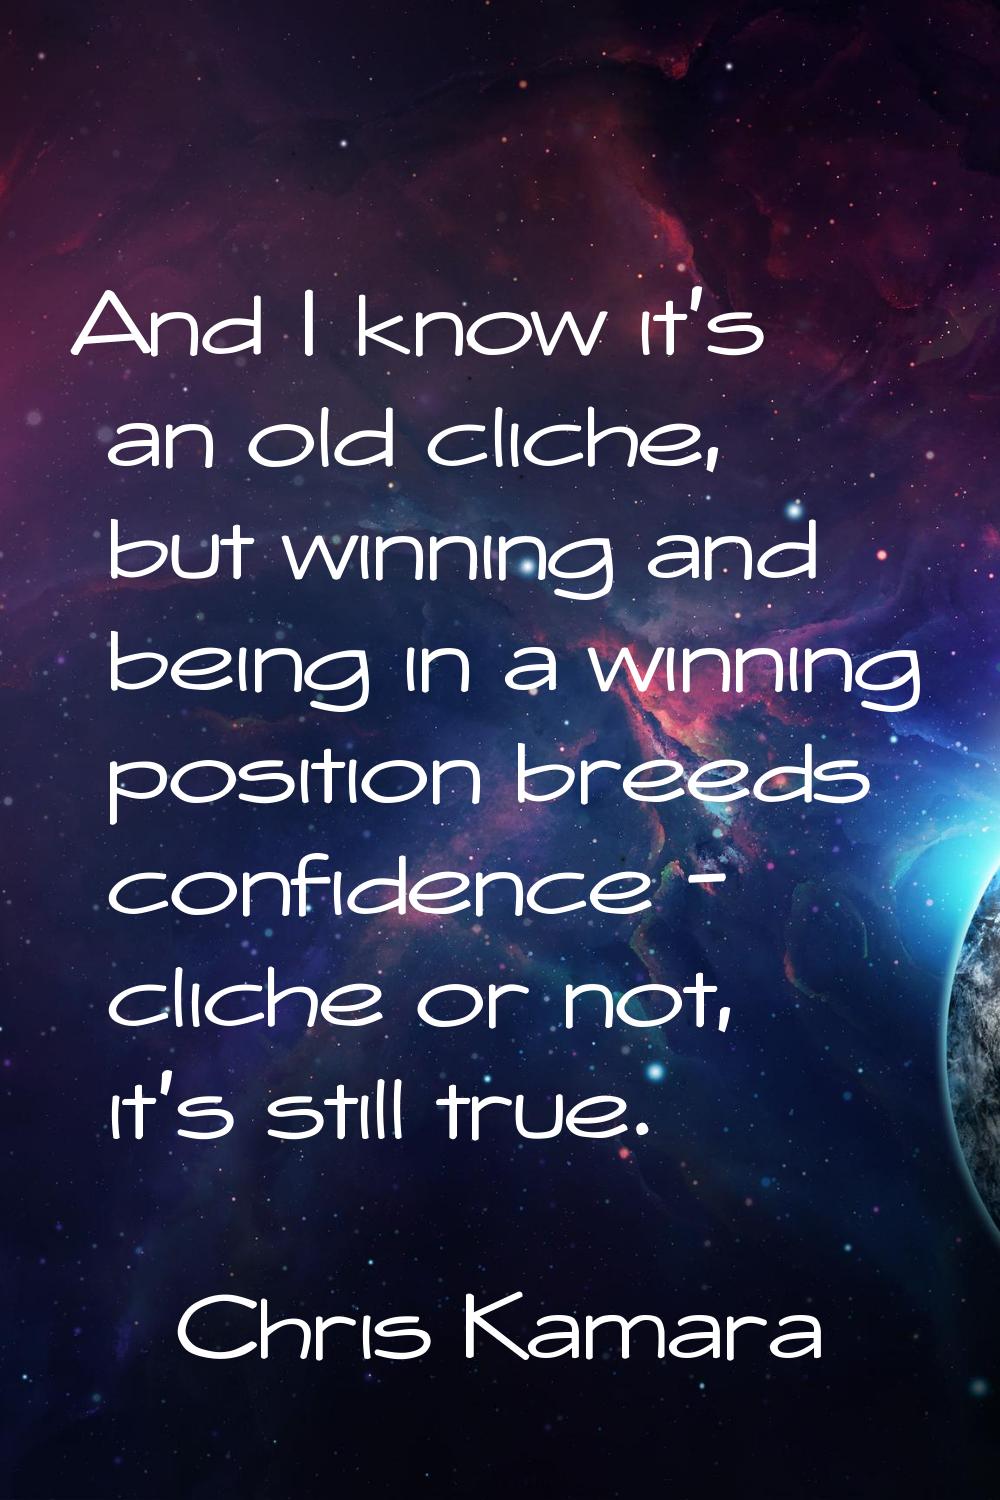 And I know it's an old cliche, but winning and being in a winning position breeds confidence - clic